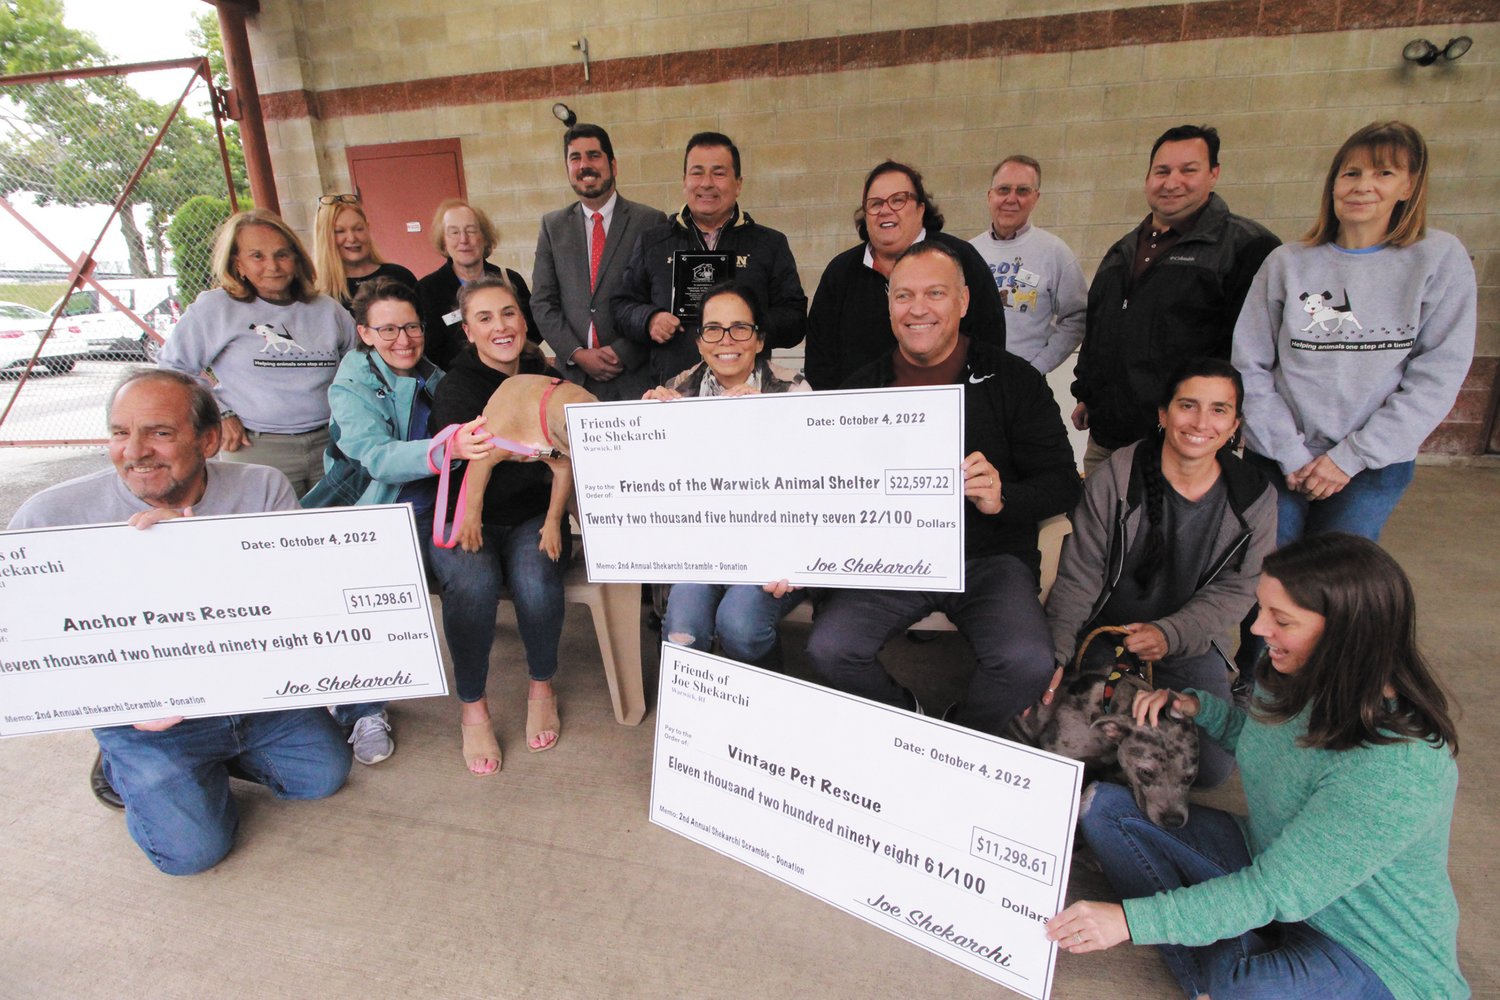 PHOTO OP WITH CHECKS AND DOGS: Representatives of three humane organizations and legislators were joined by Speaker K. Joseph Shekarchi  Tuesday afternoon at the Warwick Animal Shelter. Shekarchi presented proceeds of the his golf scramble held in August to the organizations (Warwick Beacon photo)